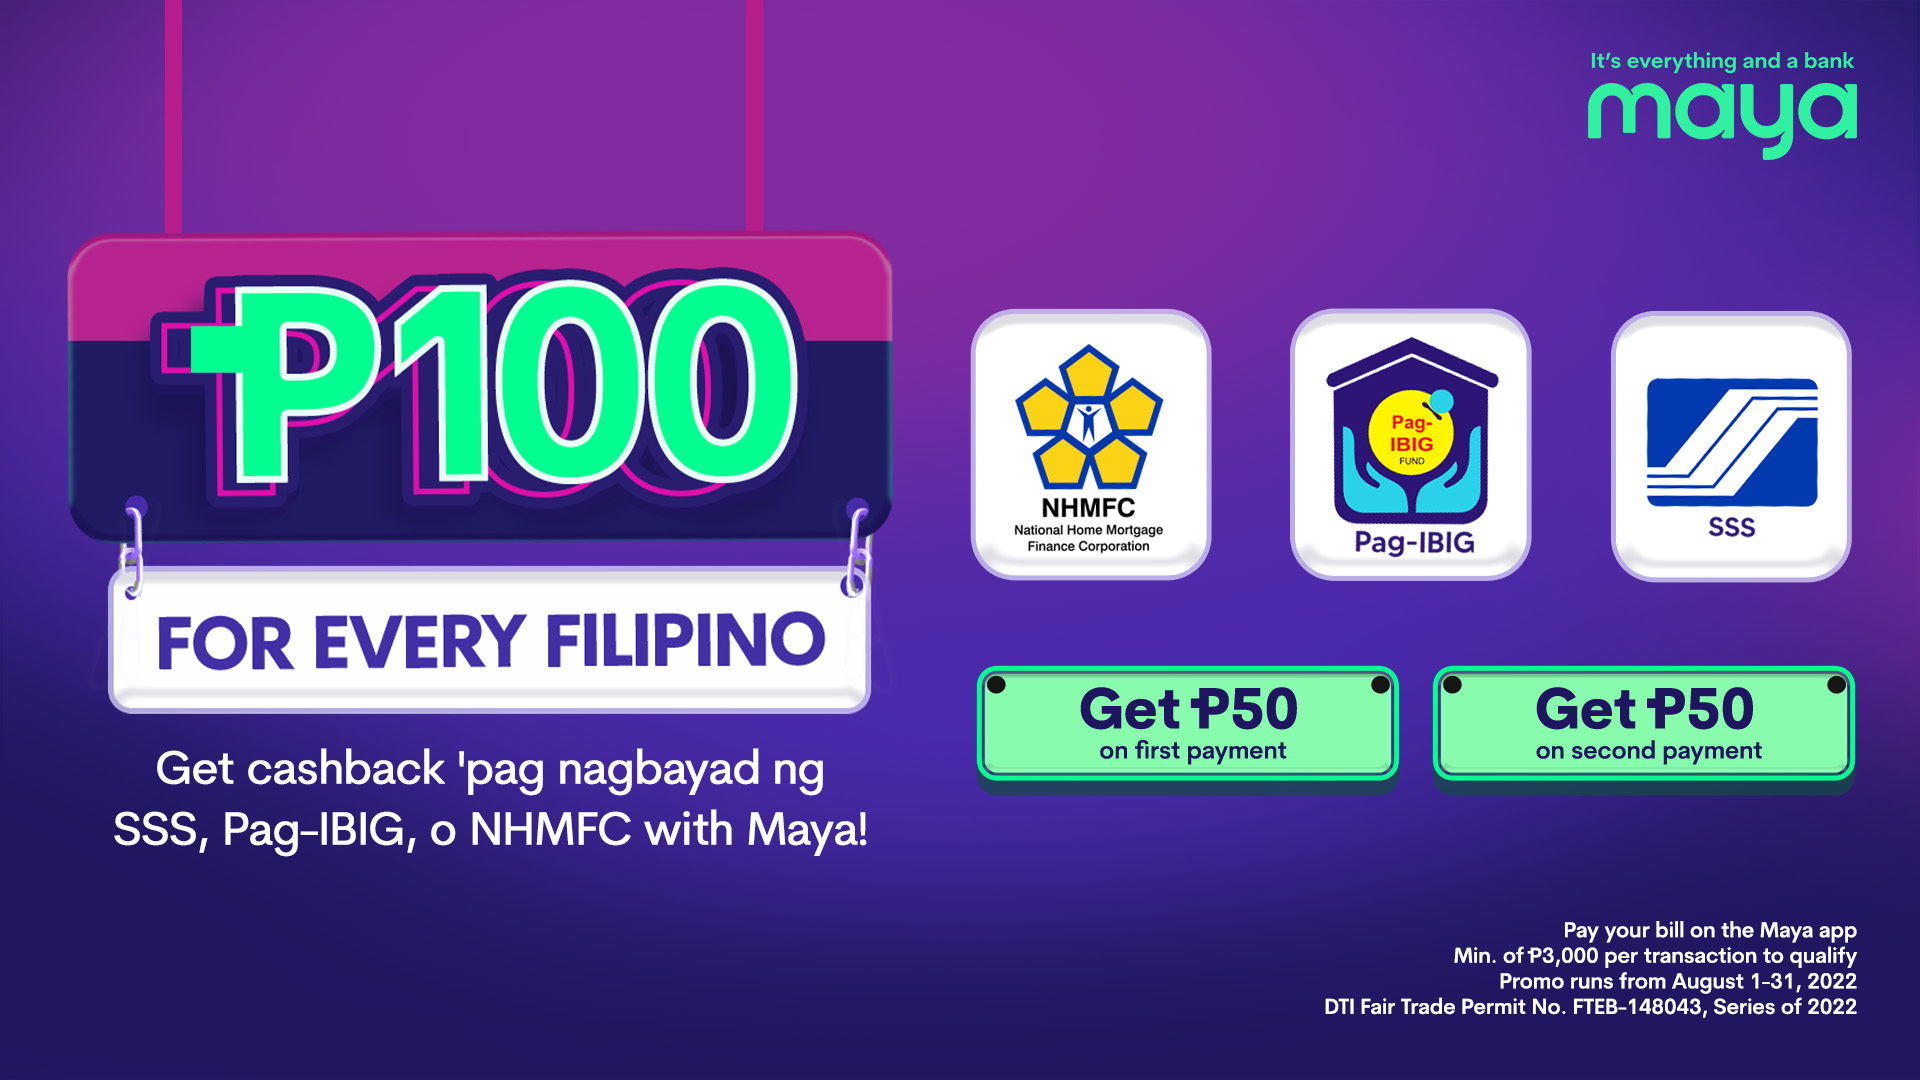 Get up to P100 cashback when you pay 2 unique Government bills for the first time in Maya!